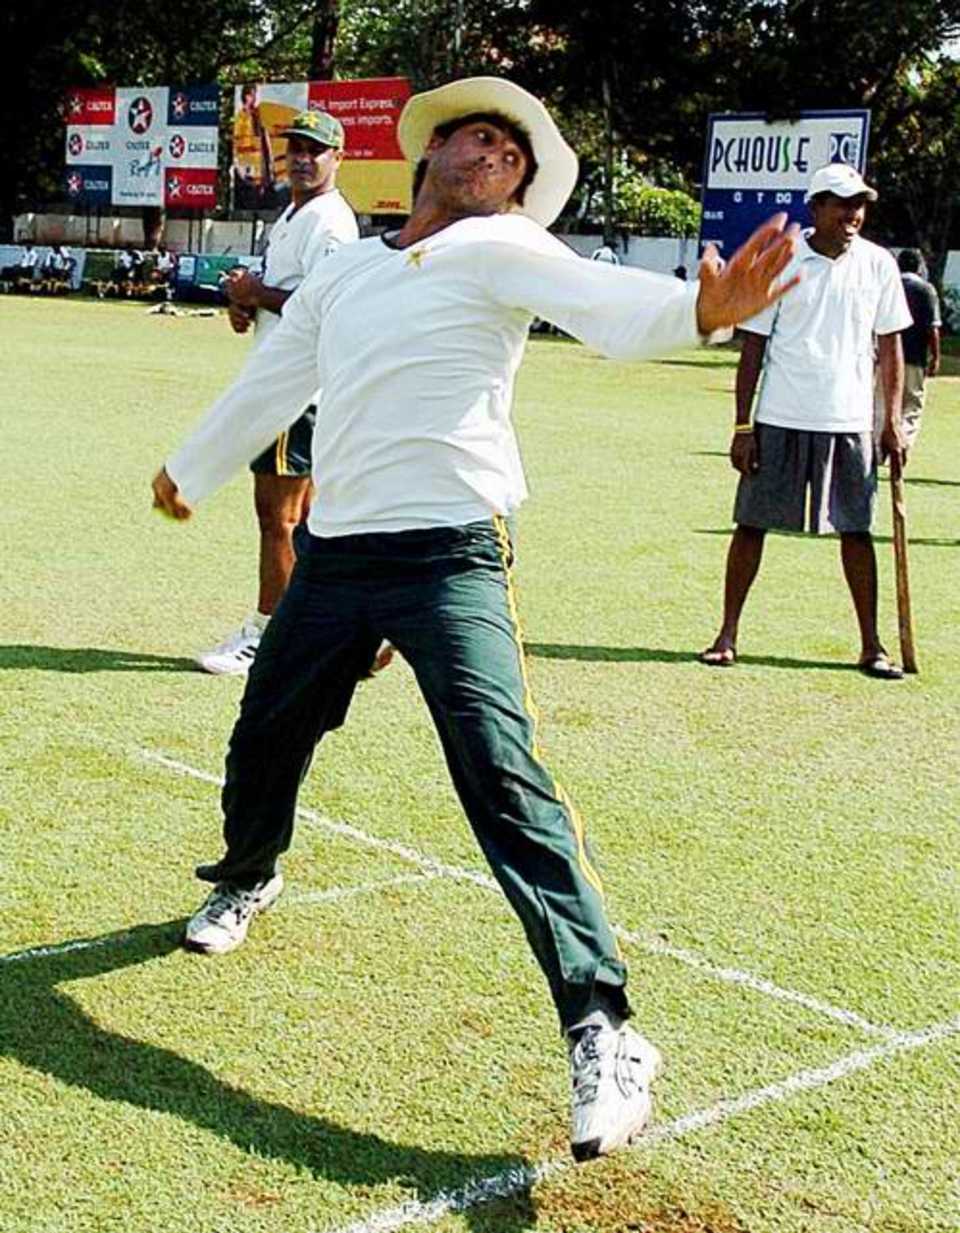 Younis Khan bowls in the nets at the Colombo Cricket Club grounds, 14 March 2006